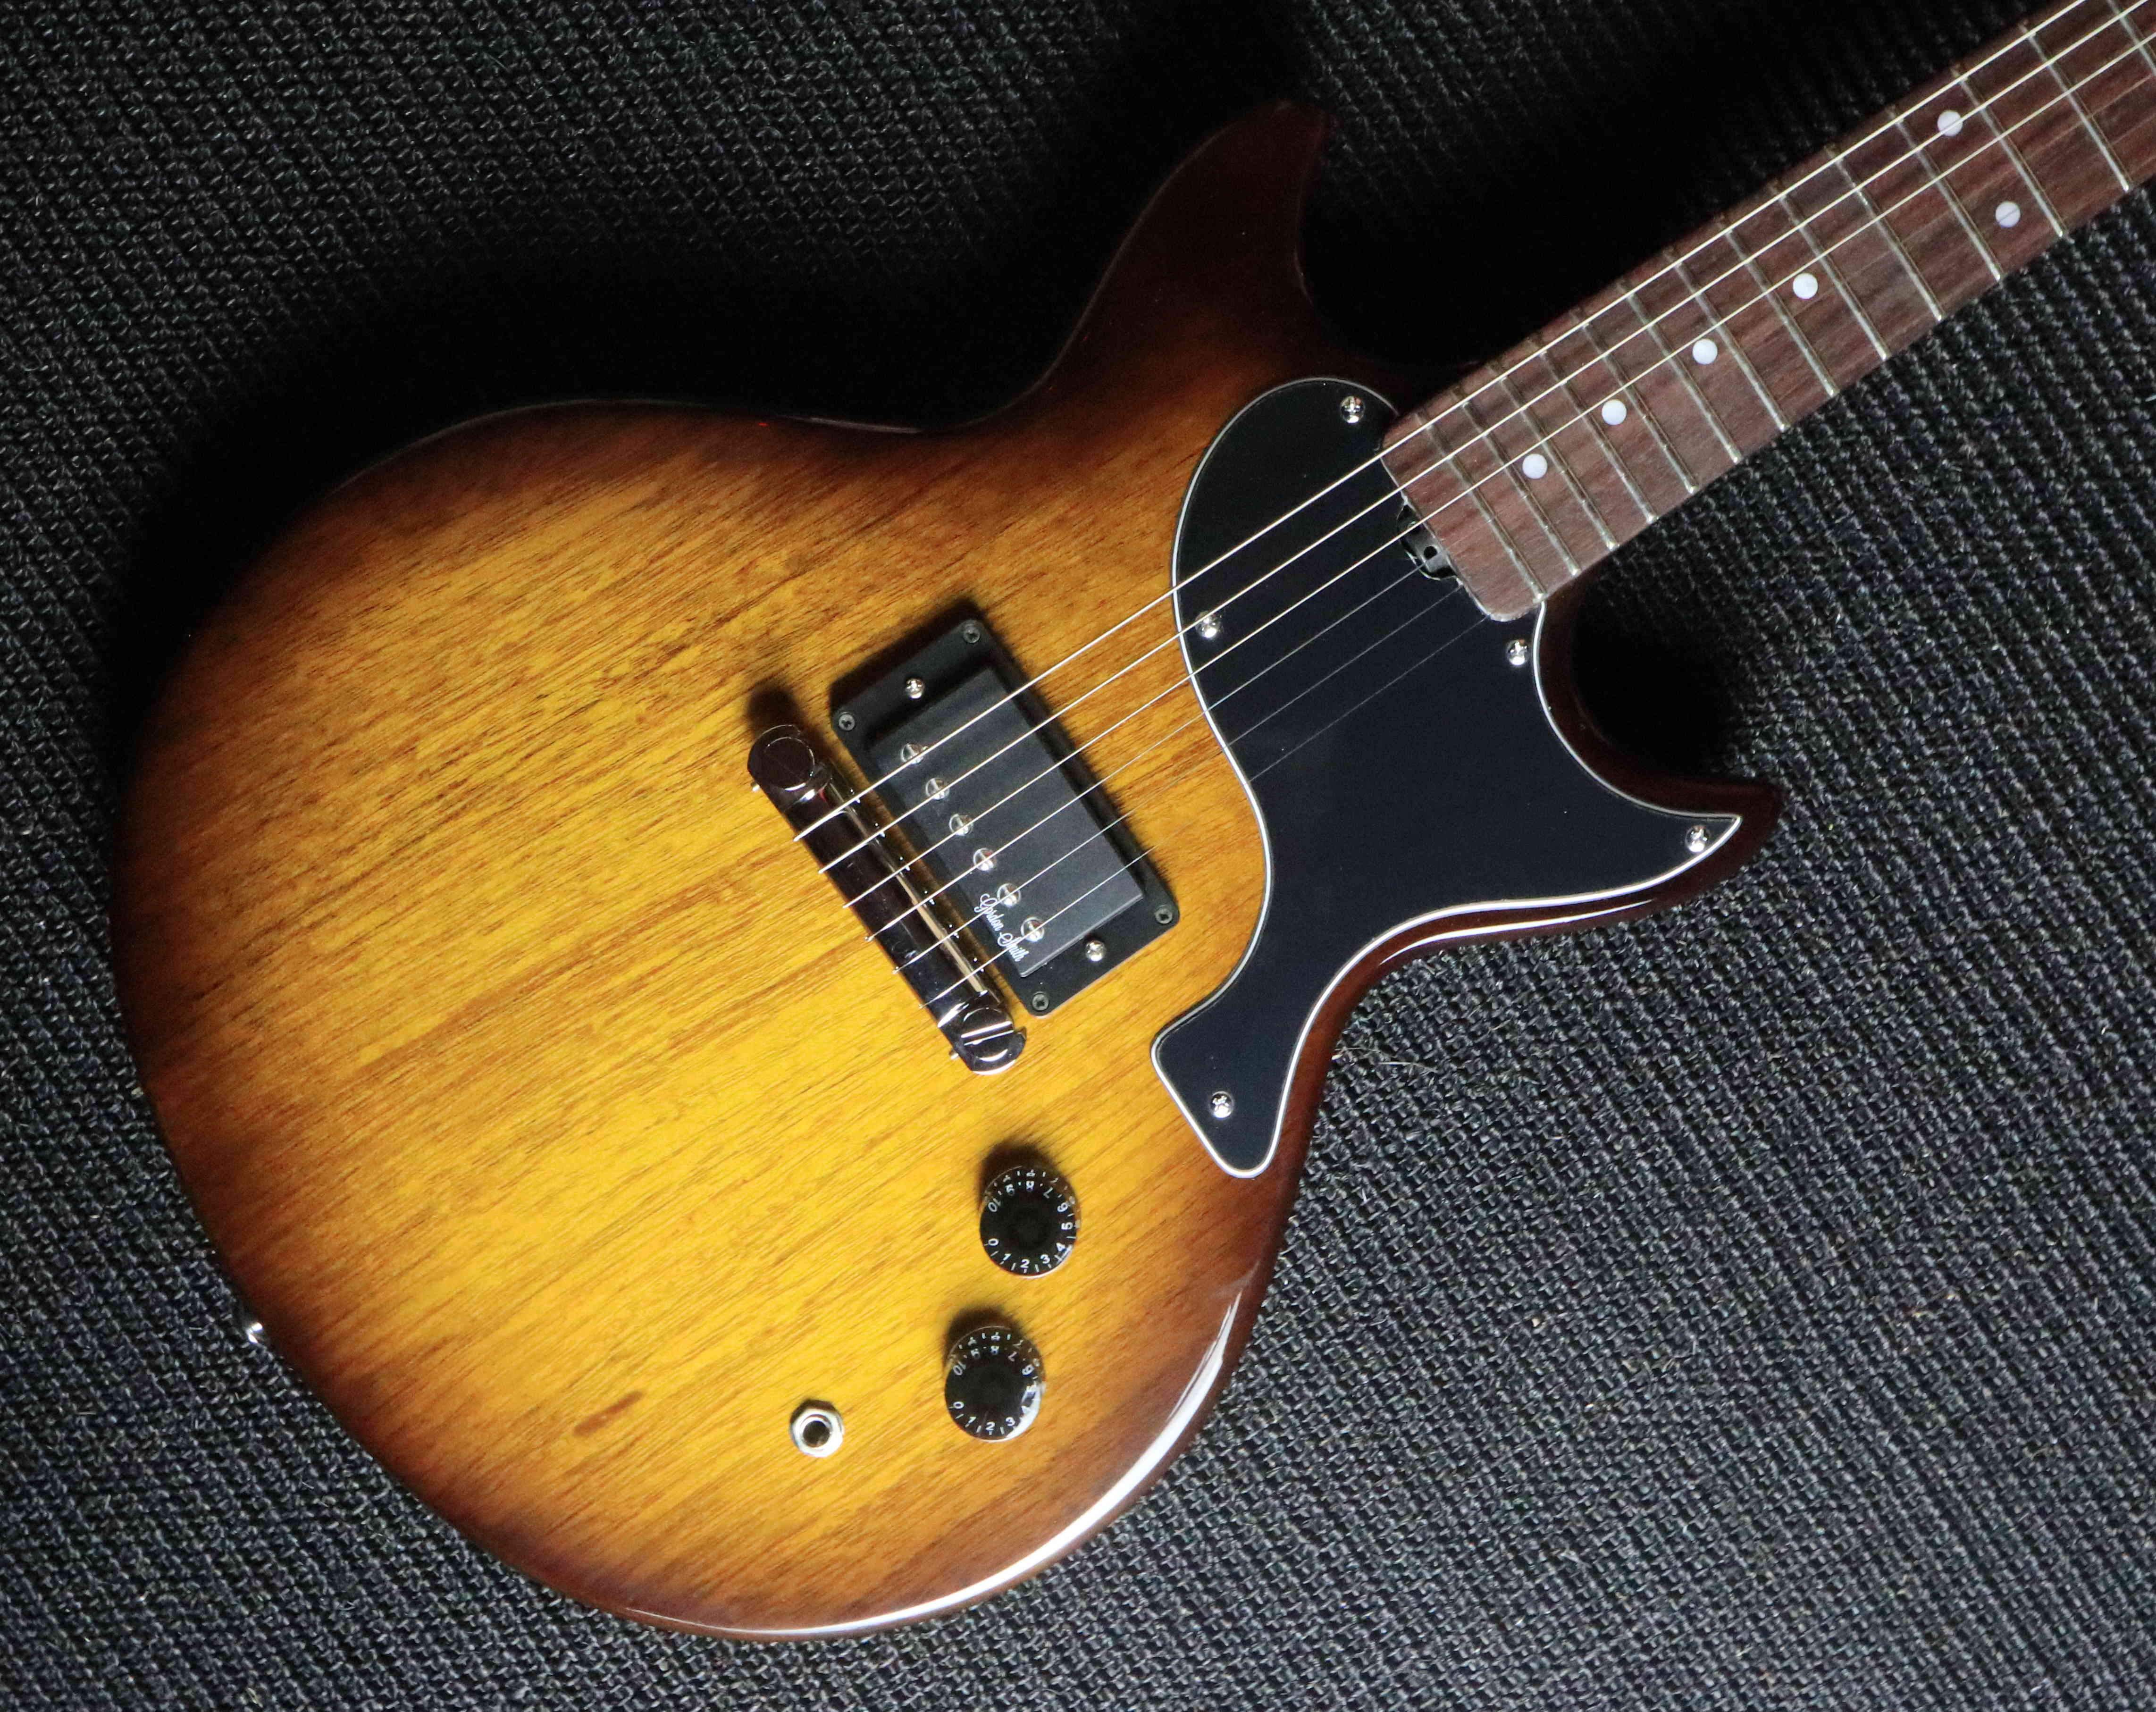 Gordon Smith Heritage GS1 Tobacco Burst SN: 18124, Electric Guitar for sale at Richards Guitars.